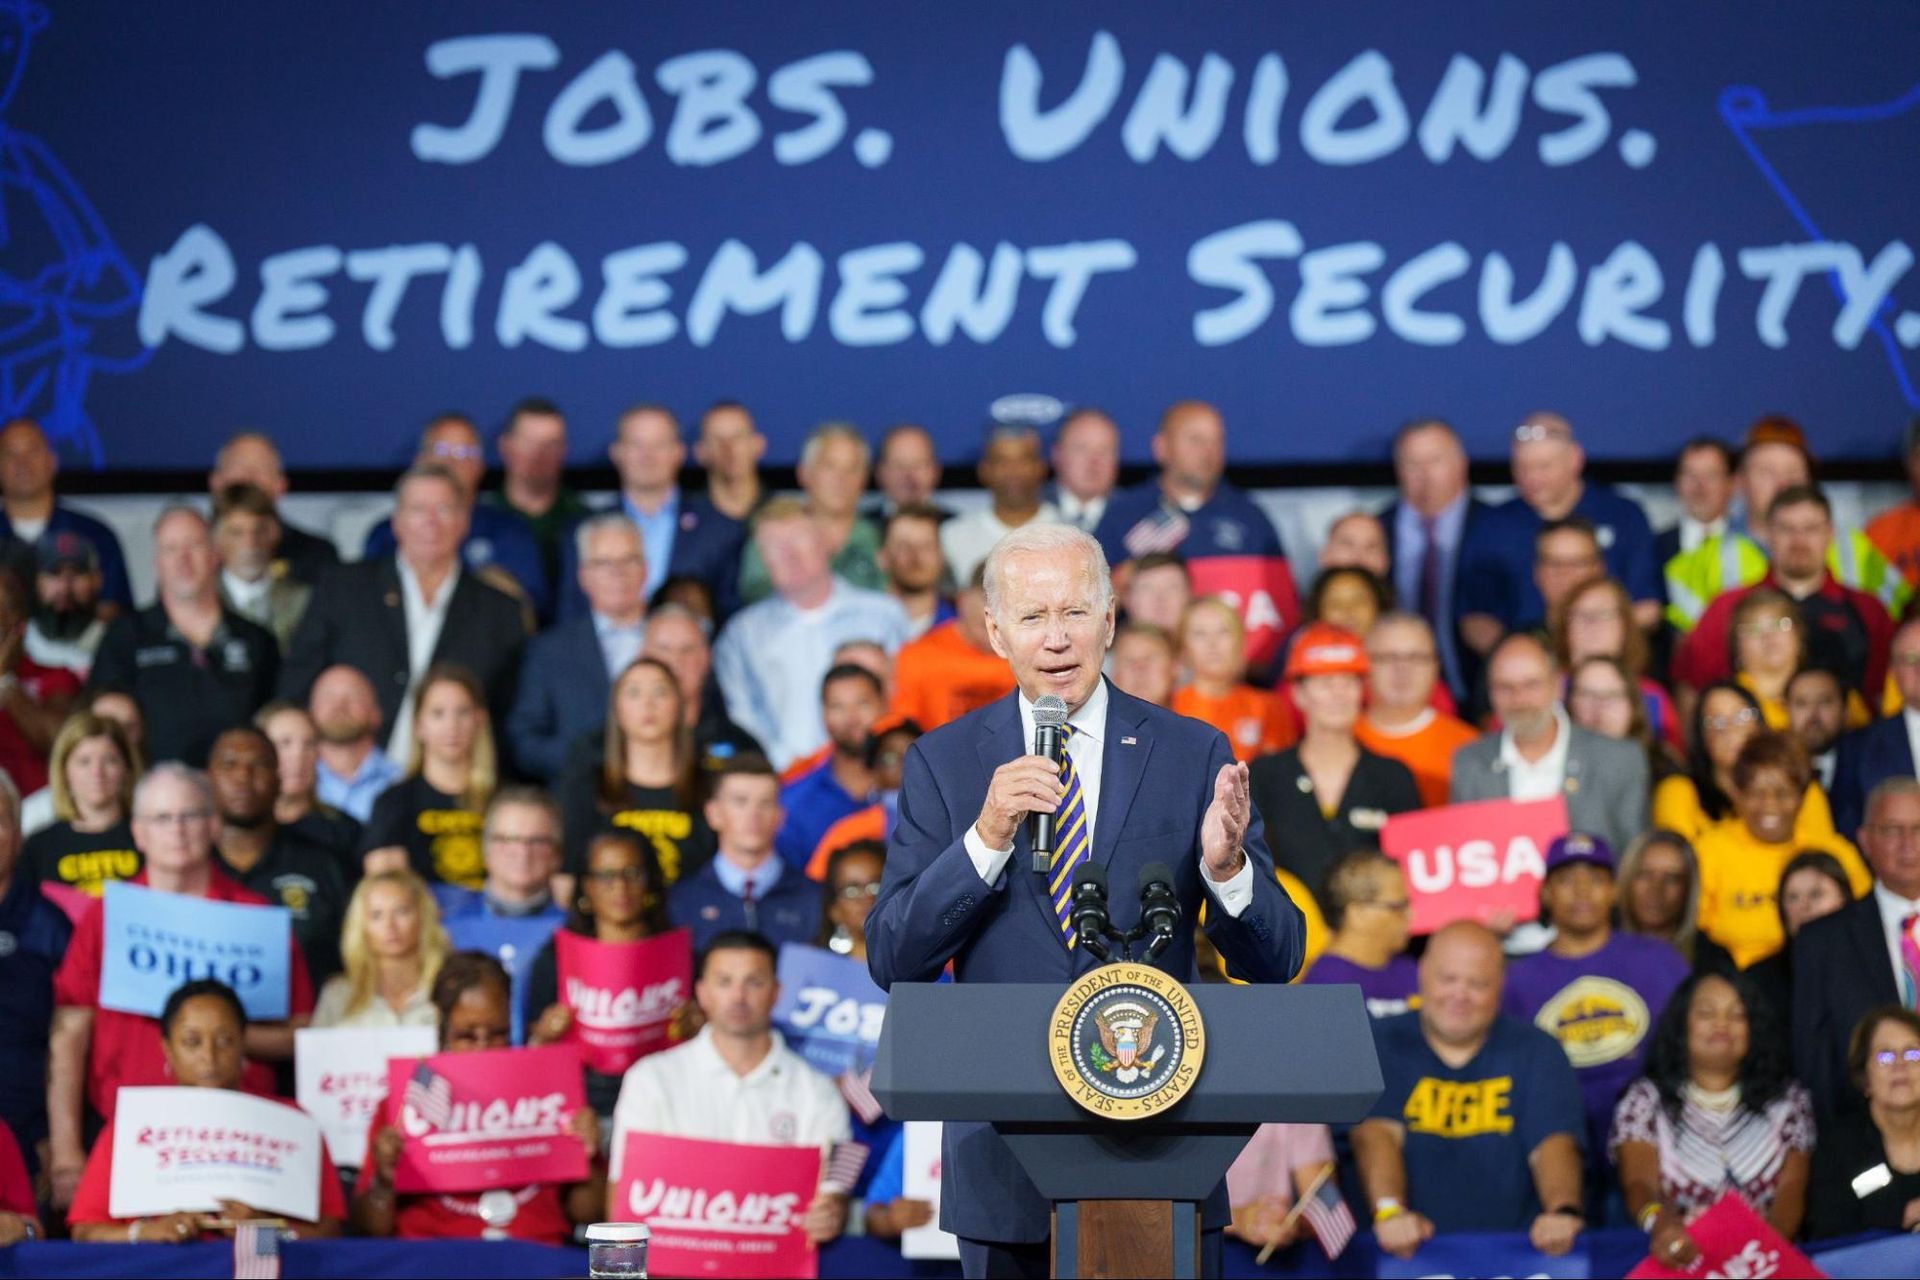 Biden speaking in front of a seated crowd with a banner above 